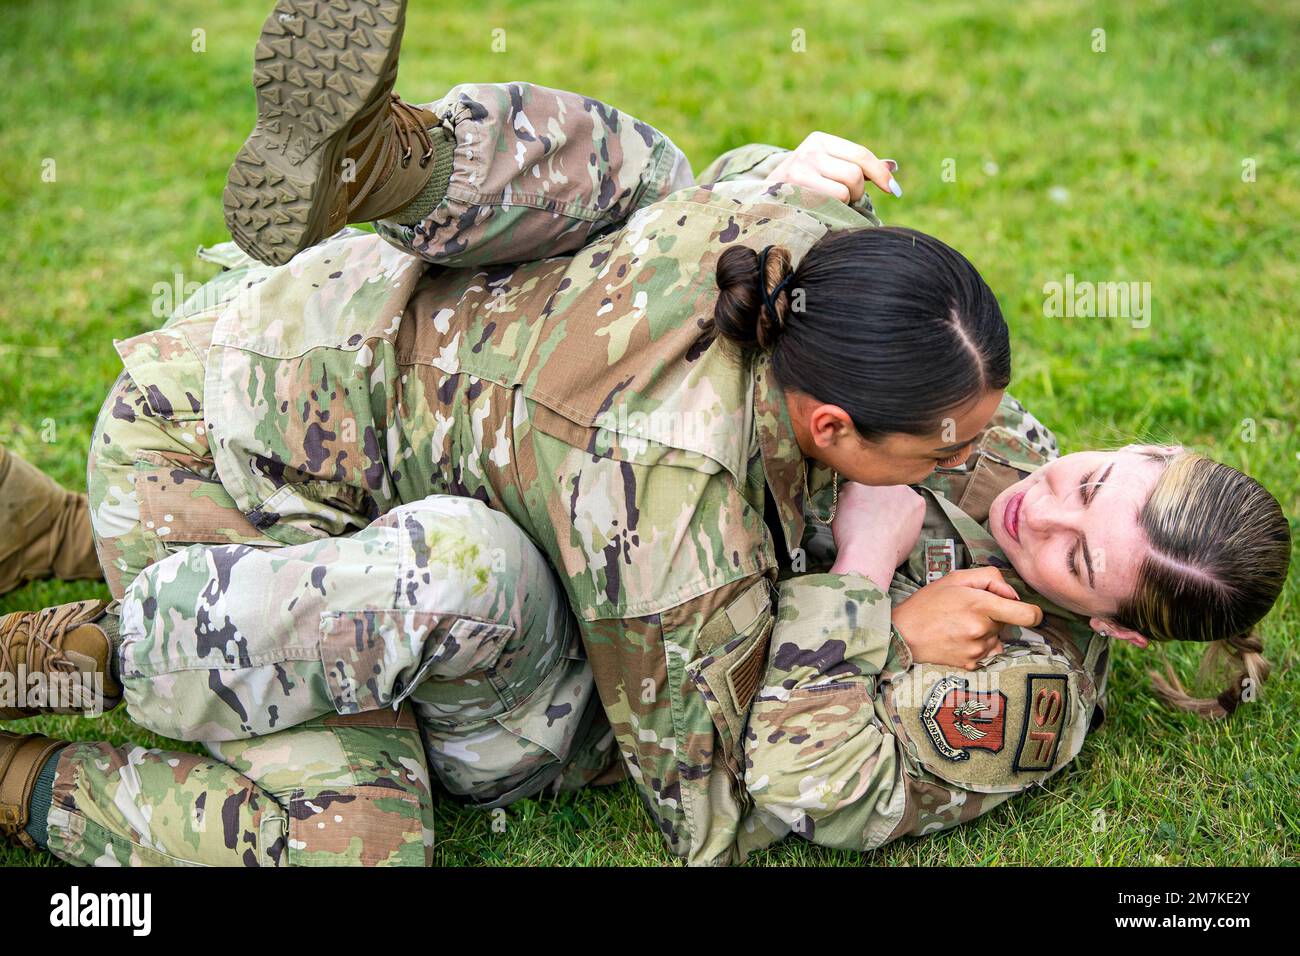 Airman 1st Class Helen Lopez, left, 423d Security Forces Squadron installation patrolman, and Airman 1st Class Sierra Capobianco, base defense operations center controller, demonstrate grappling at RAF Molesworth, England, May 10, 2022. The 423d SFS taught students from Huntingdon’s St. Peter’s school about weapons safety and self defense techniques as part of a mentorship program aimed at strengthening the relationship between the 501st Combat Support Wing and local community. Stock Photo